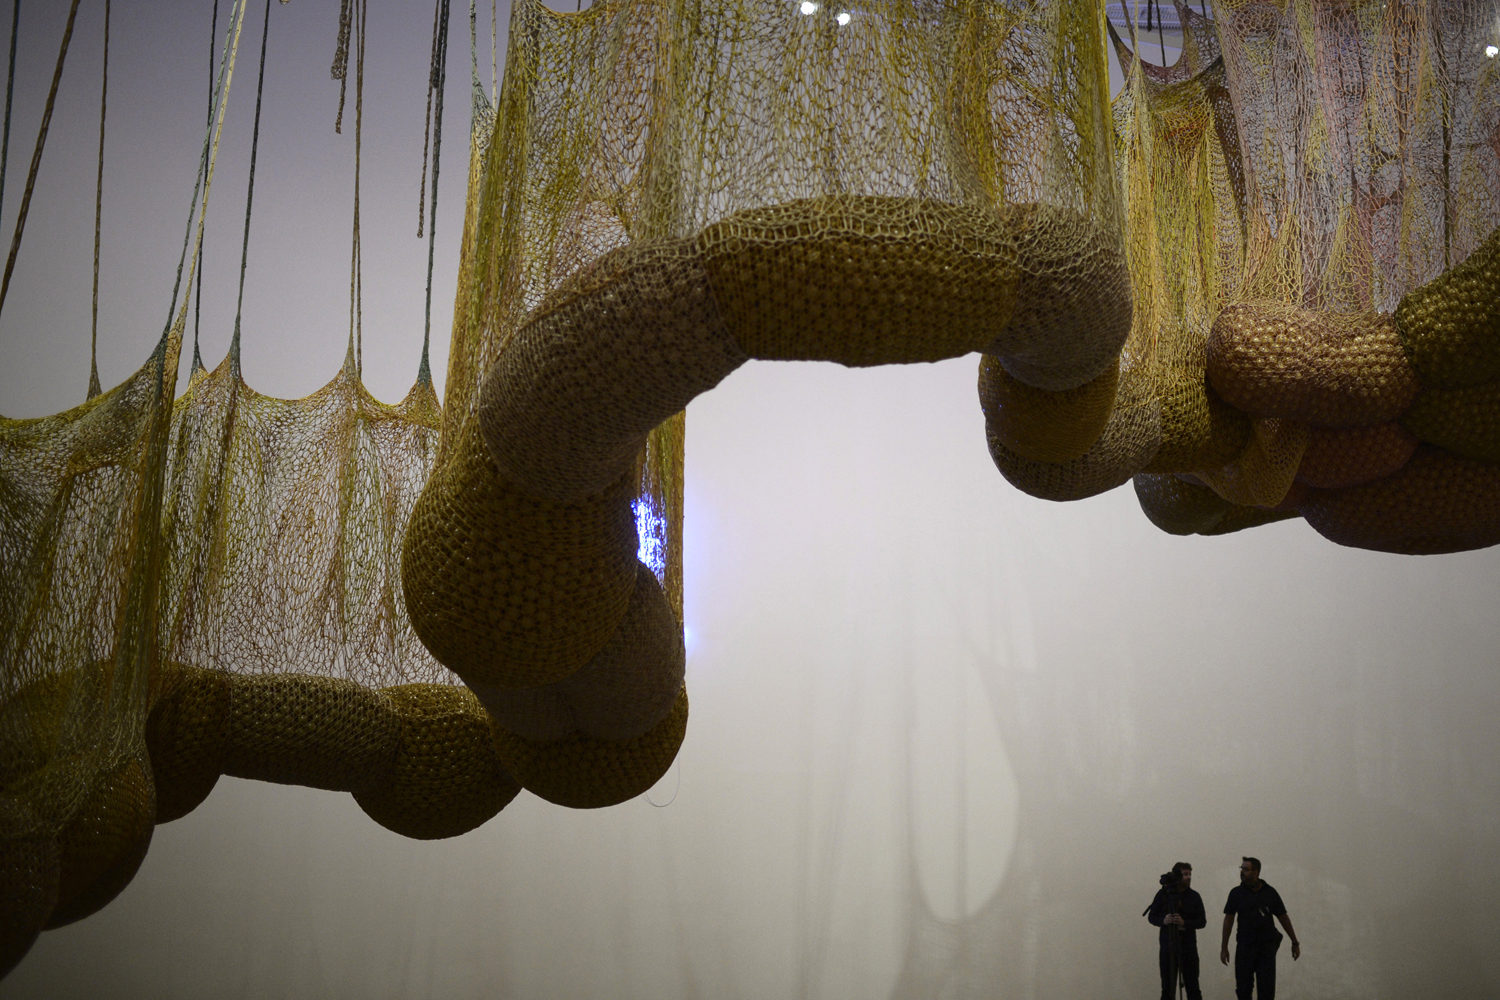 Visitors stand under "Life Is A Body We Are Part Of", a giant biomorphic sculpture that forms part of a retrospective of the work of Brazilian artist Ernesto Neto, at the Guggenheim Museum in Bilbao